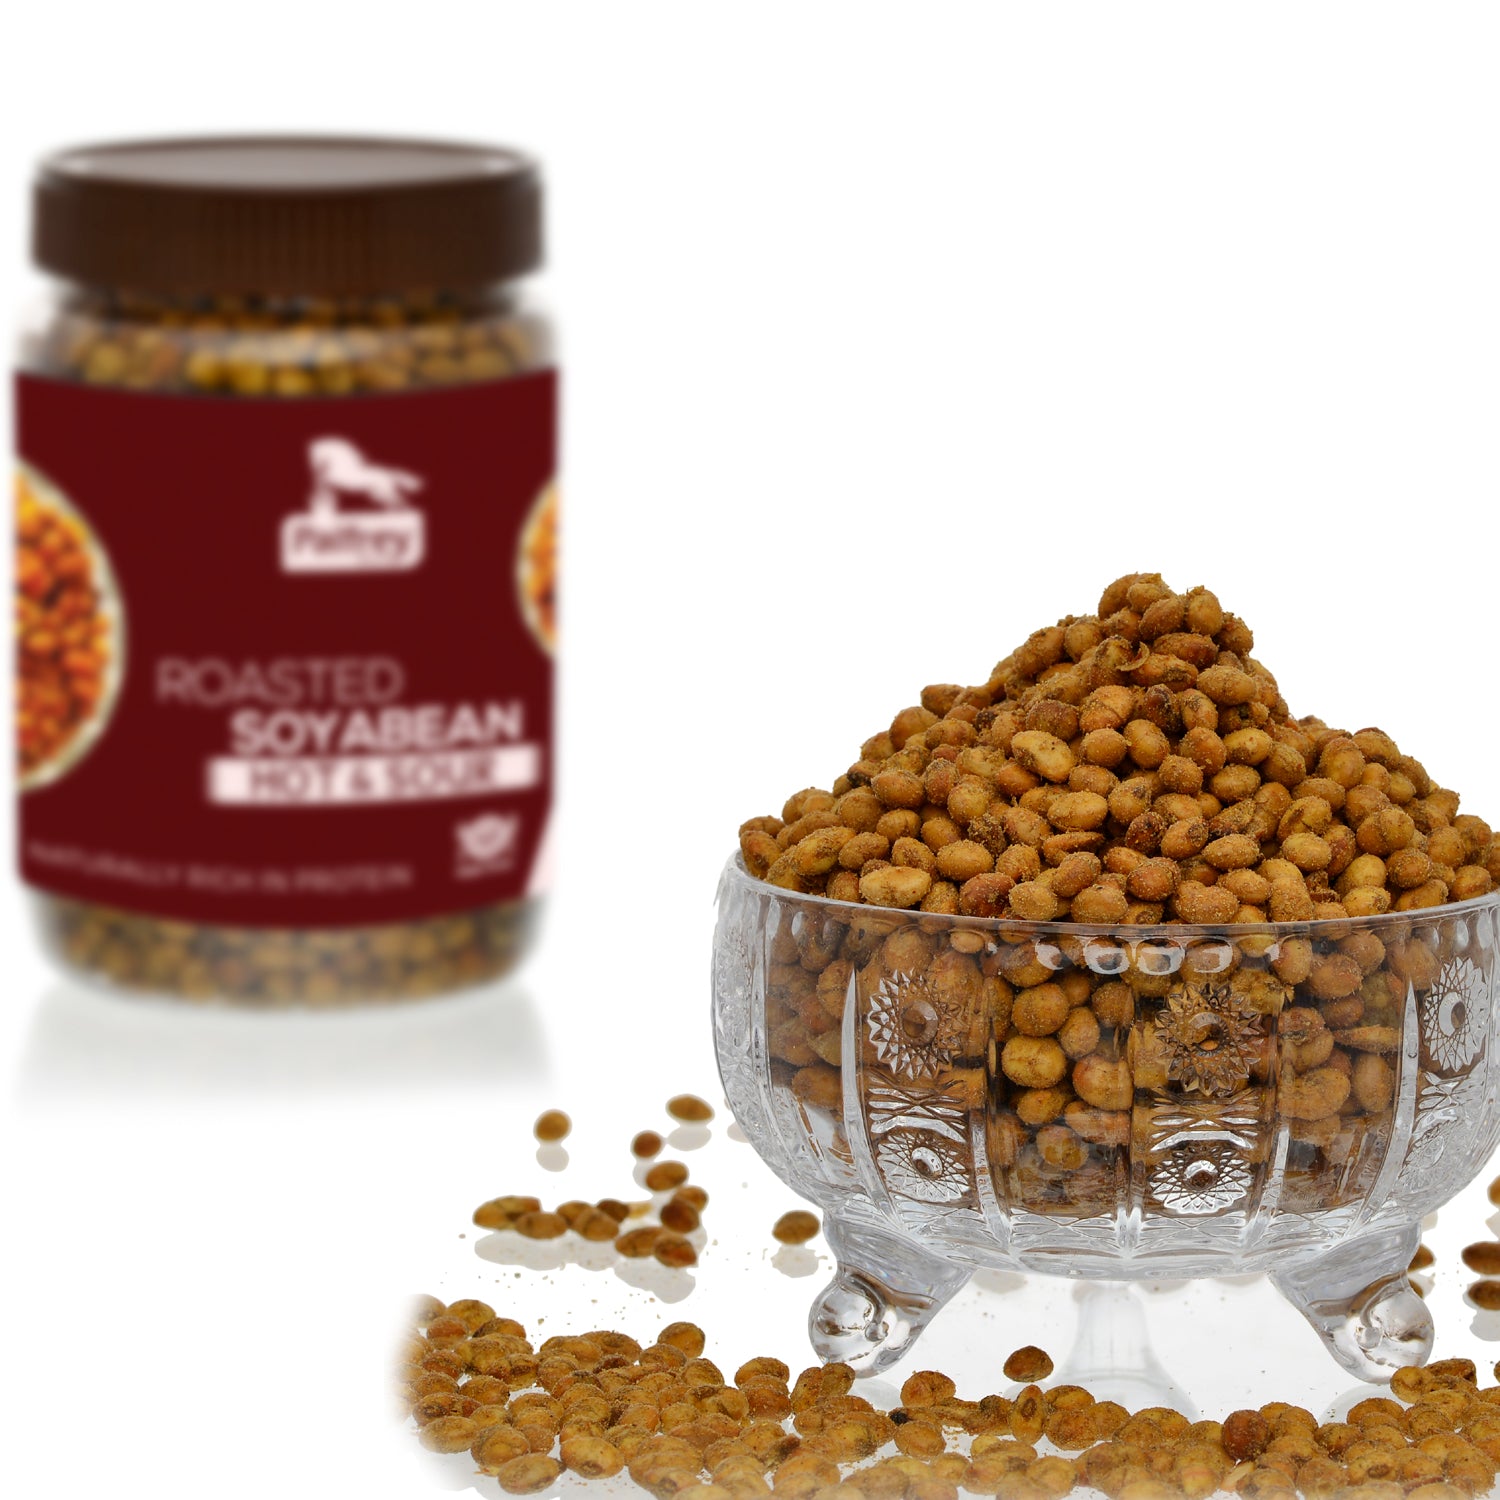 Roasted Soyabean- Hot & Sour 300g